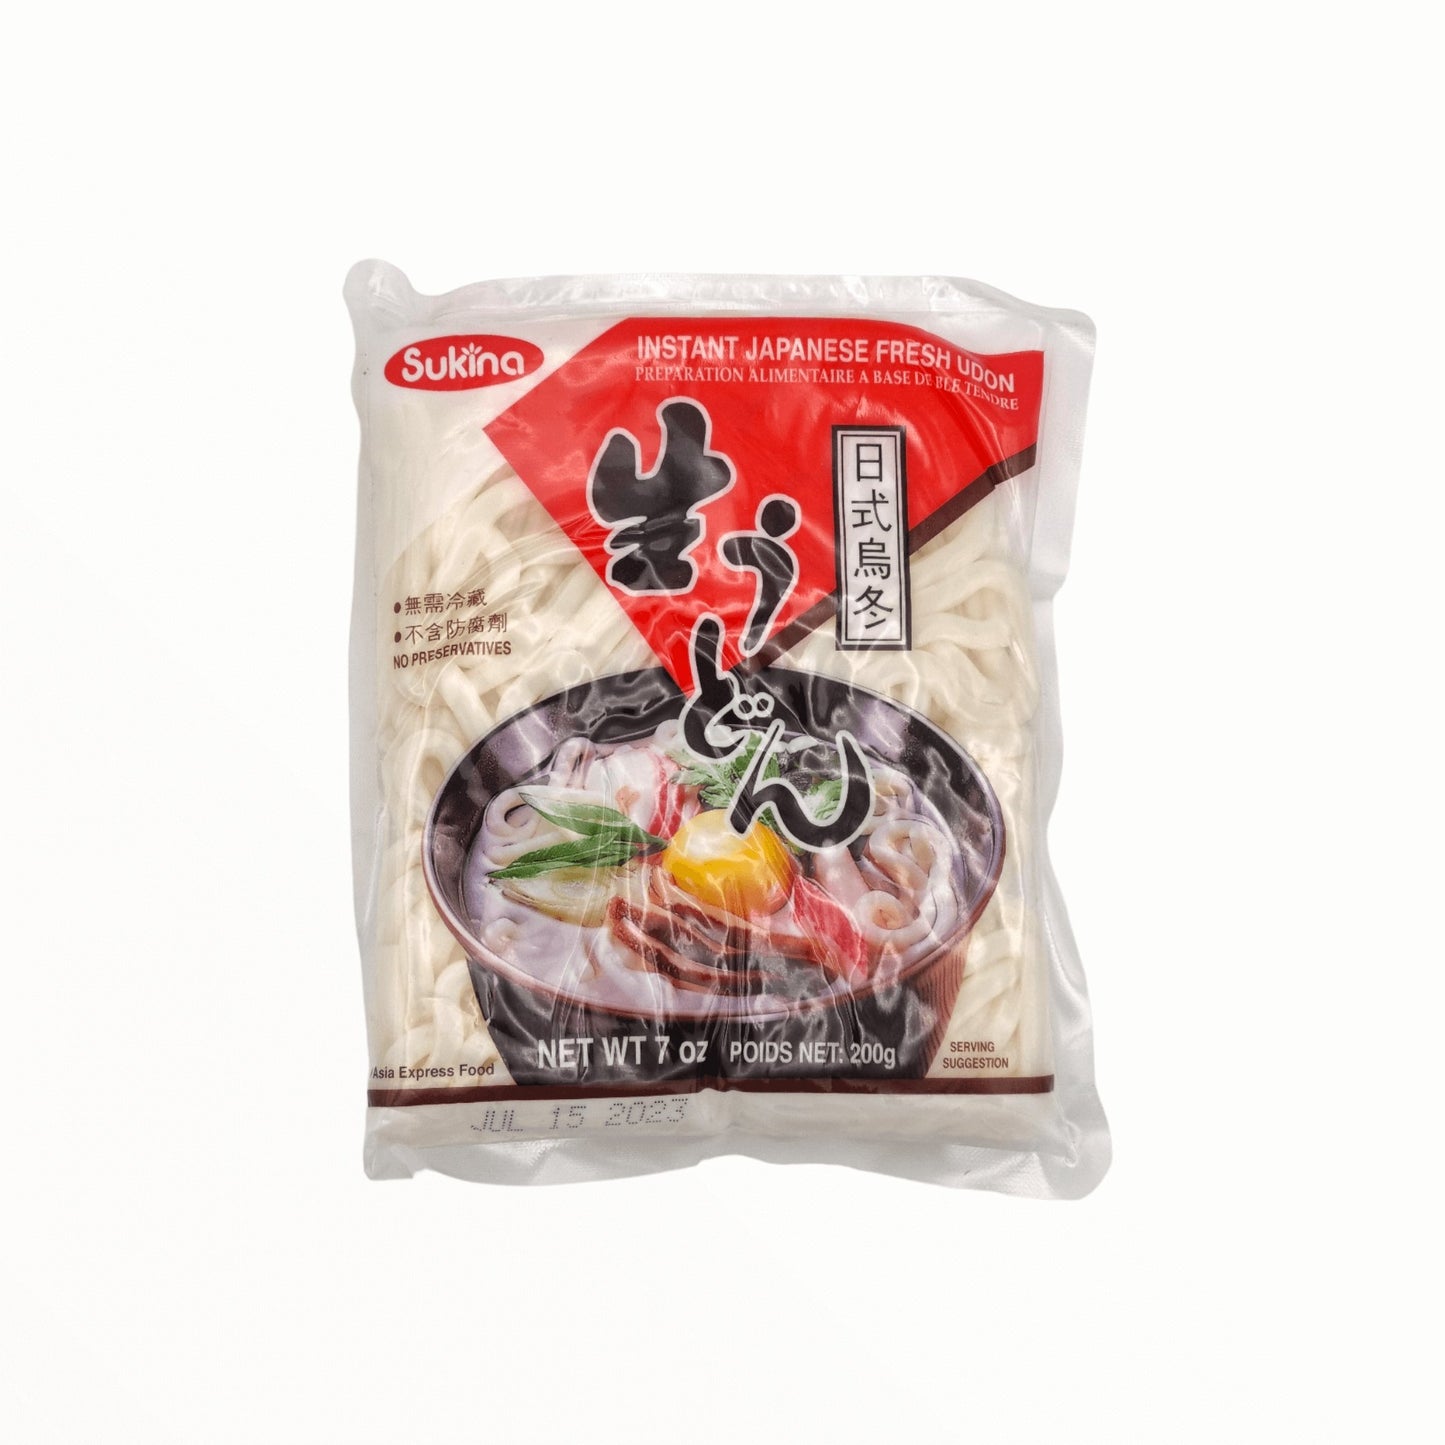 Frische Udon Nudeln 200g - Mabuhay Pinoy Asia Shop